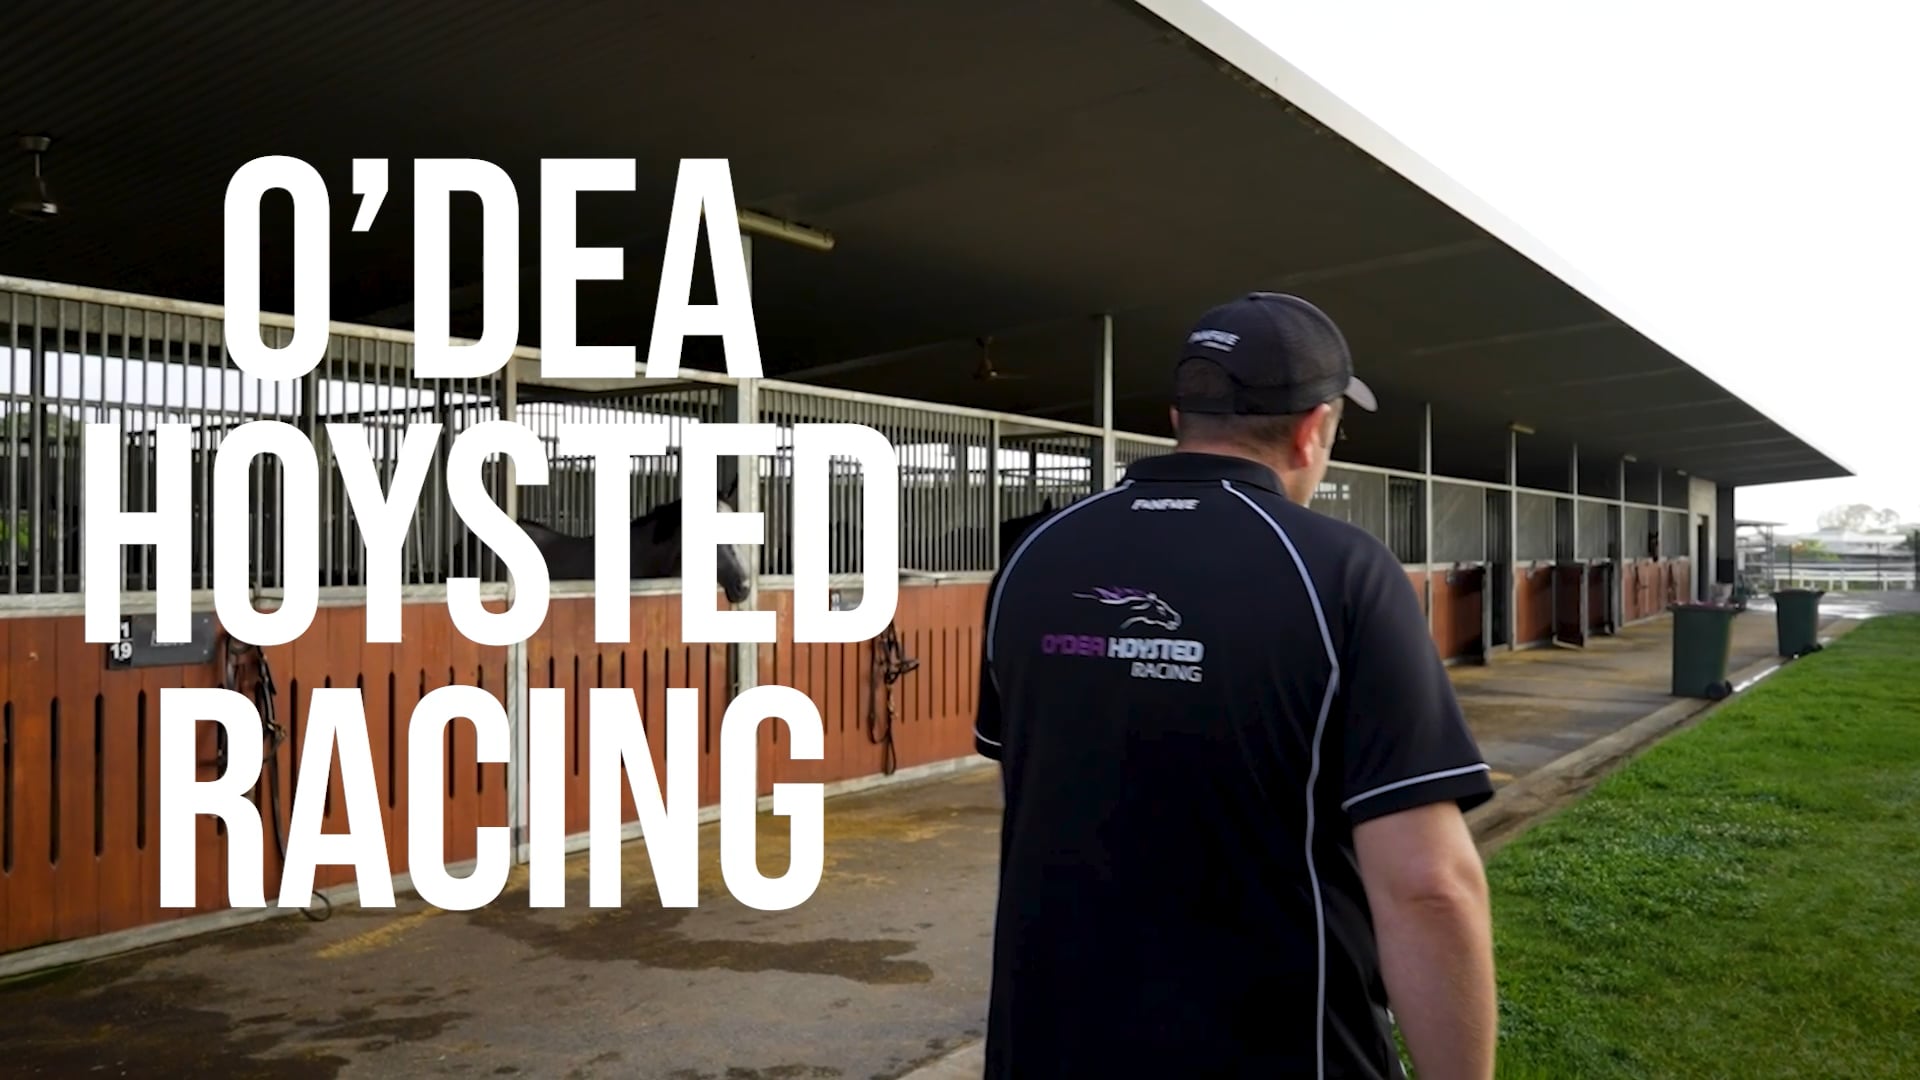 Behind the stable door - odea hoysted racing